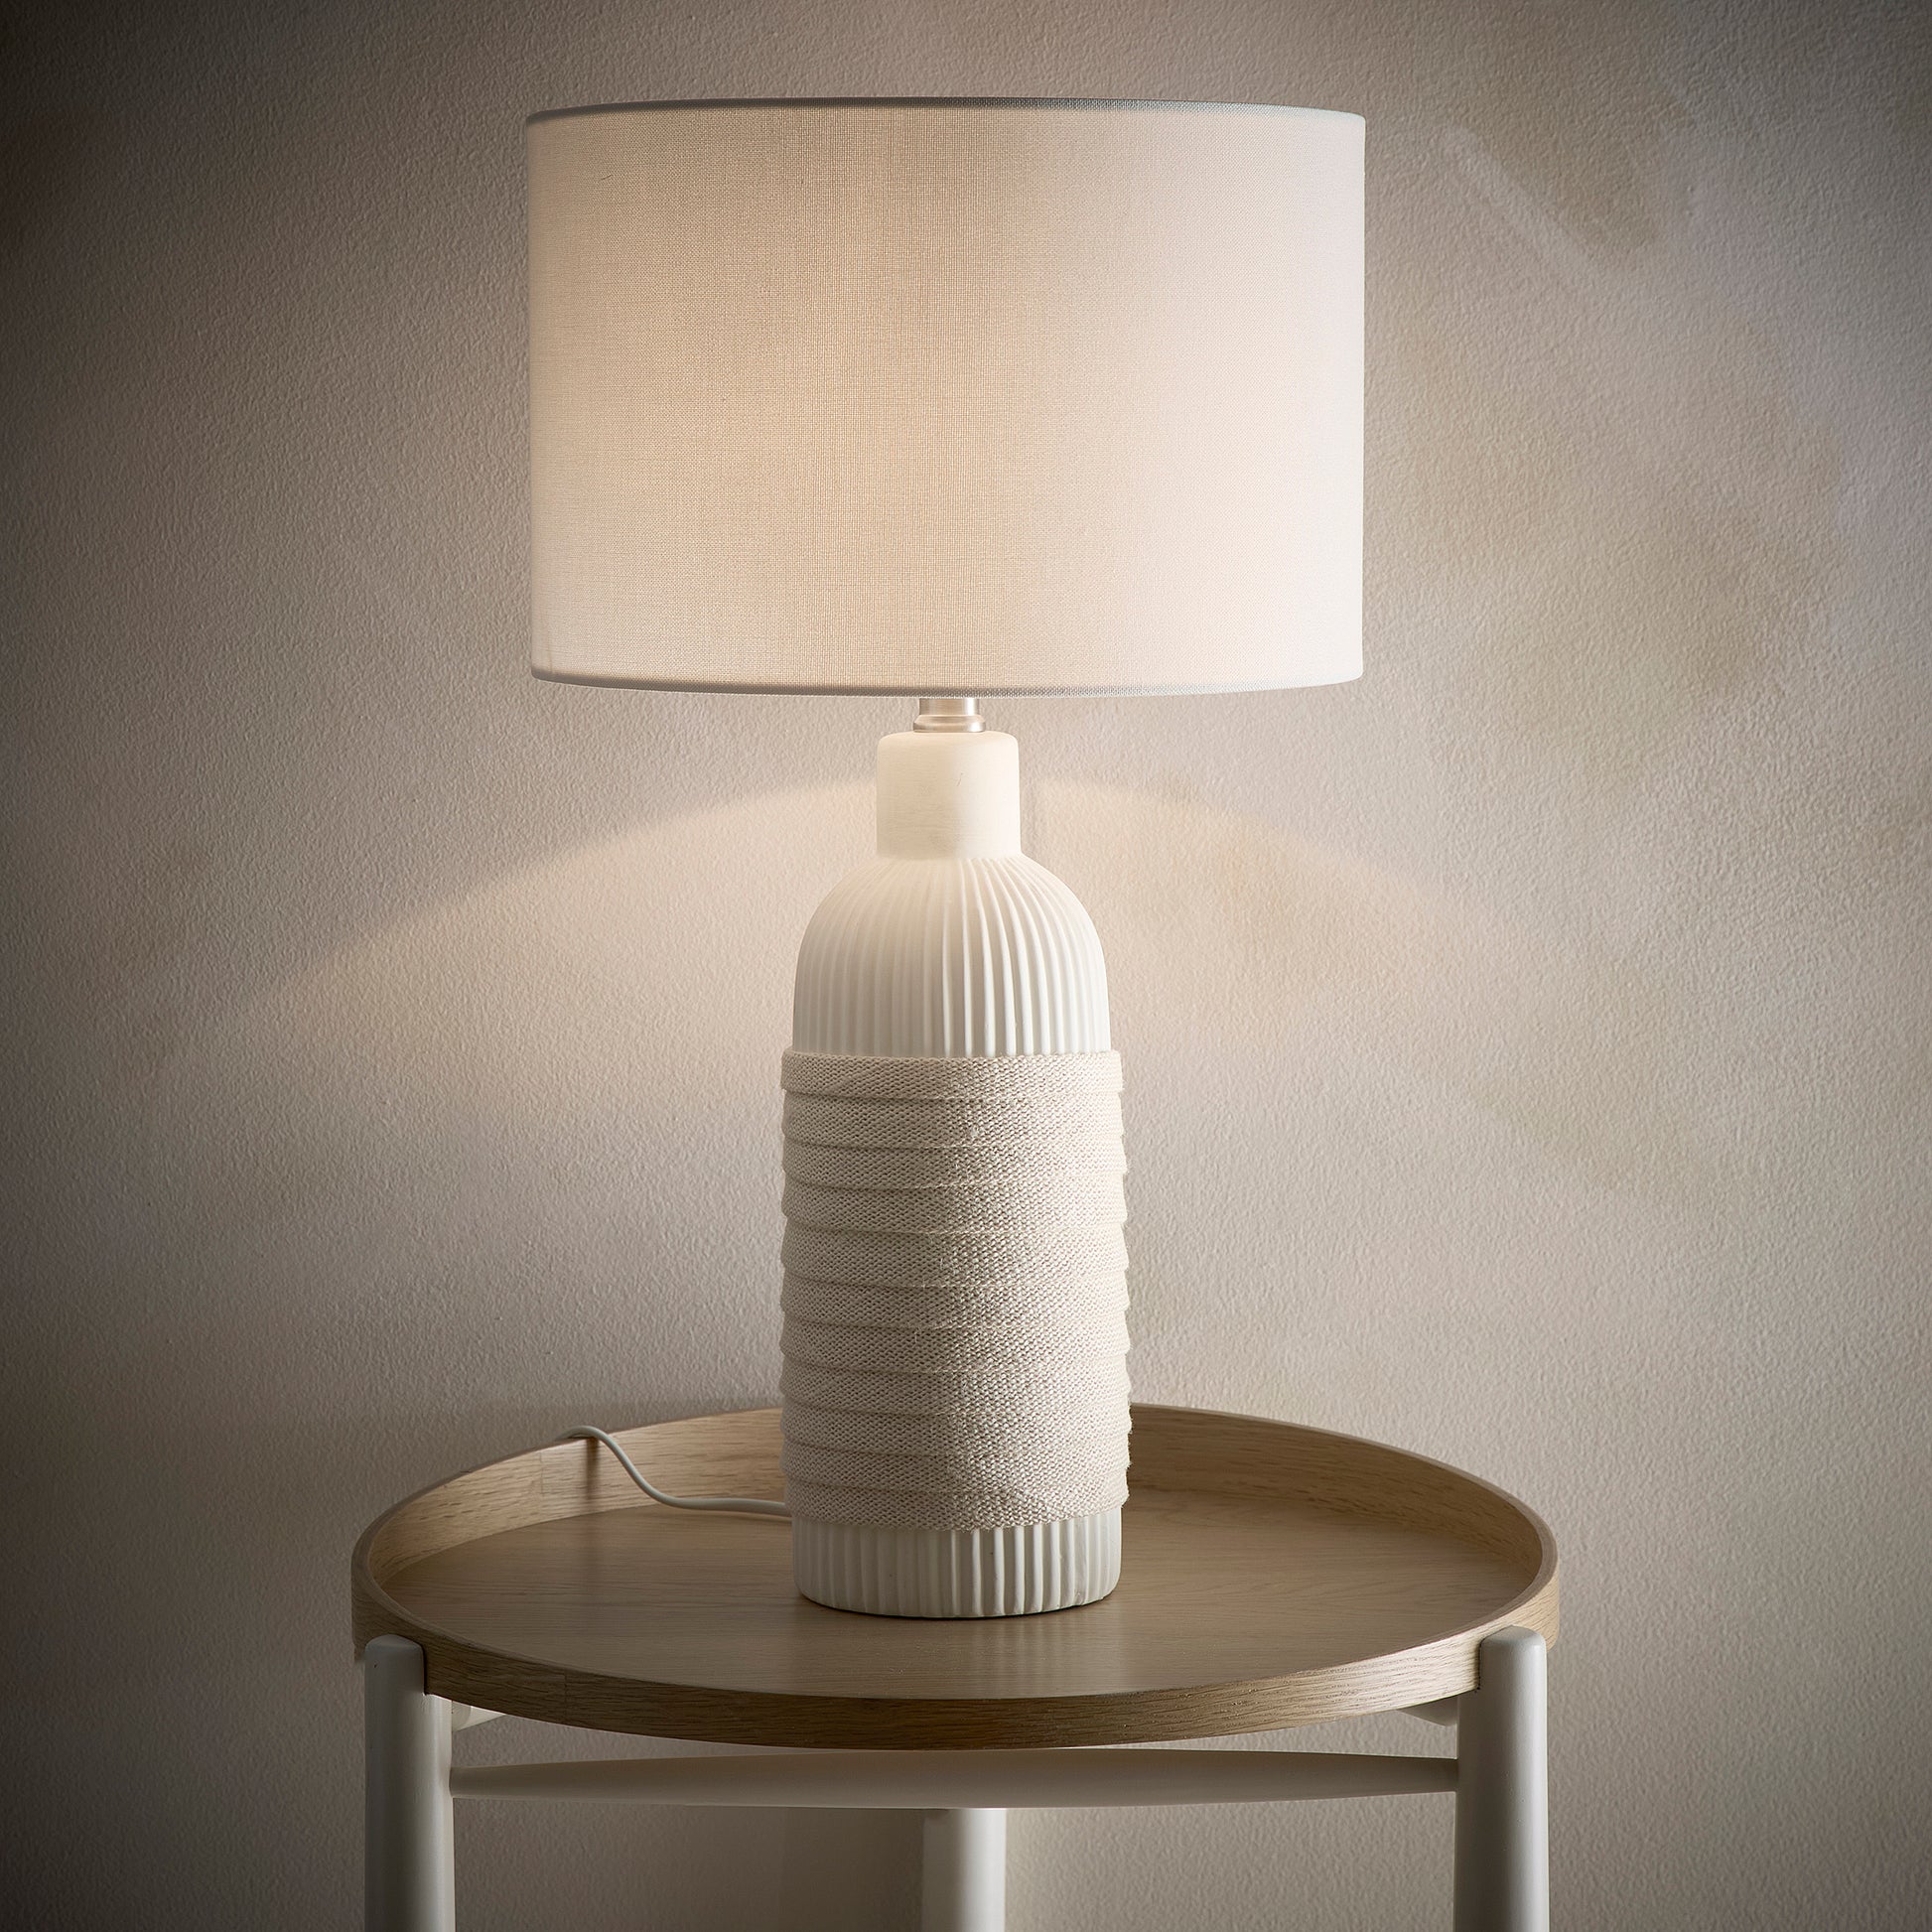 Ceramic Table Lamp in a Light Cream Finish with a Natural Rope design and a Linen Lampshade